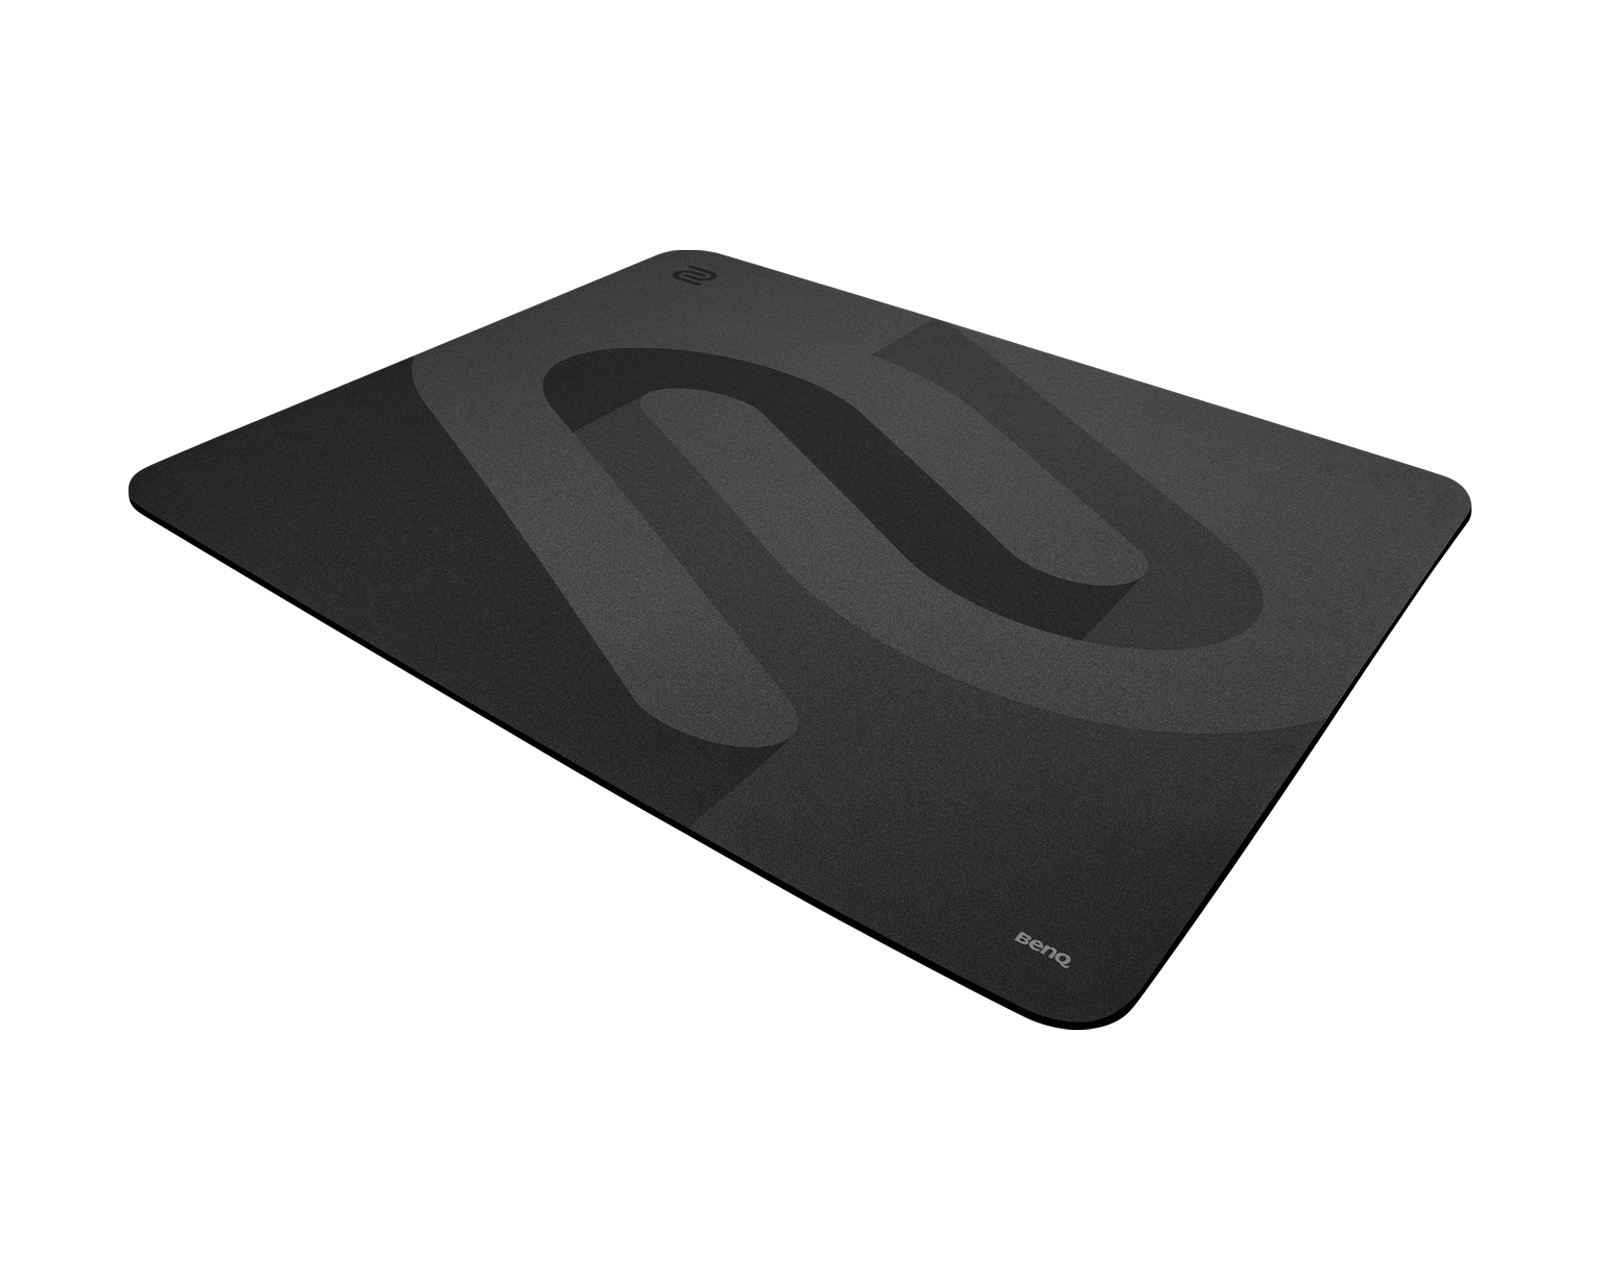 G-SR Large Gaming Mouse Pad for Esports Control